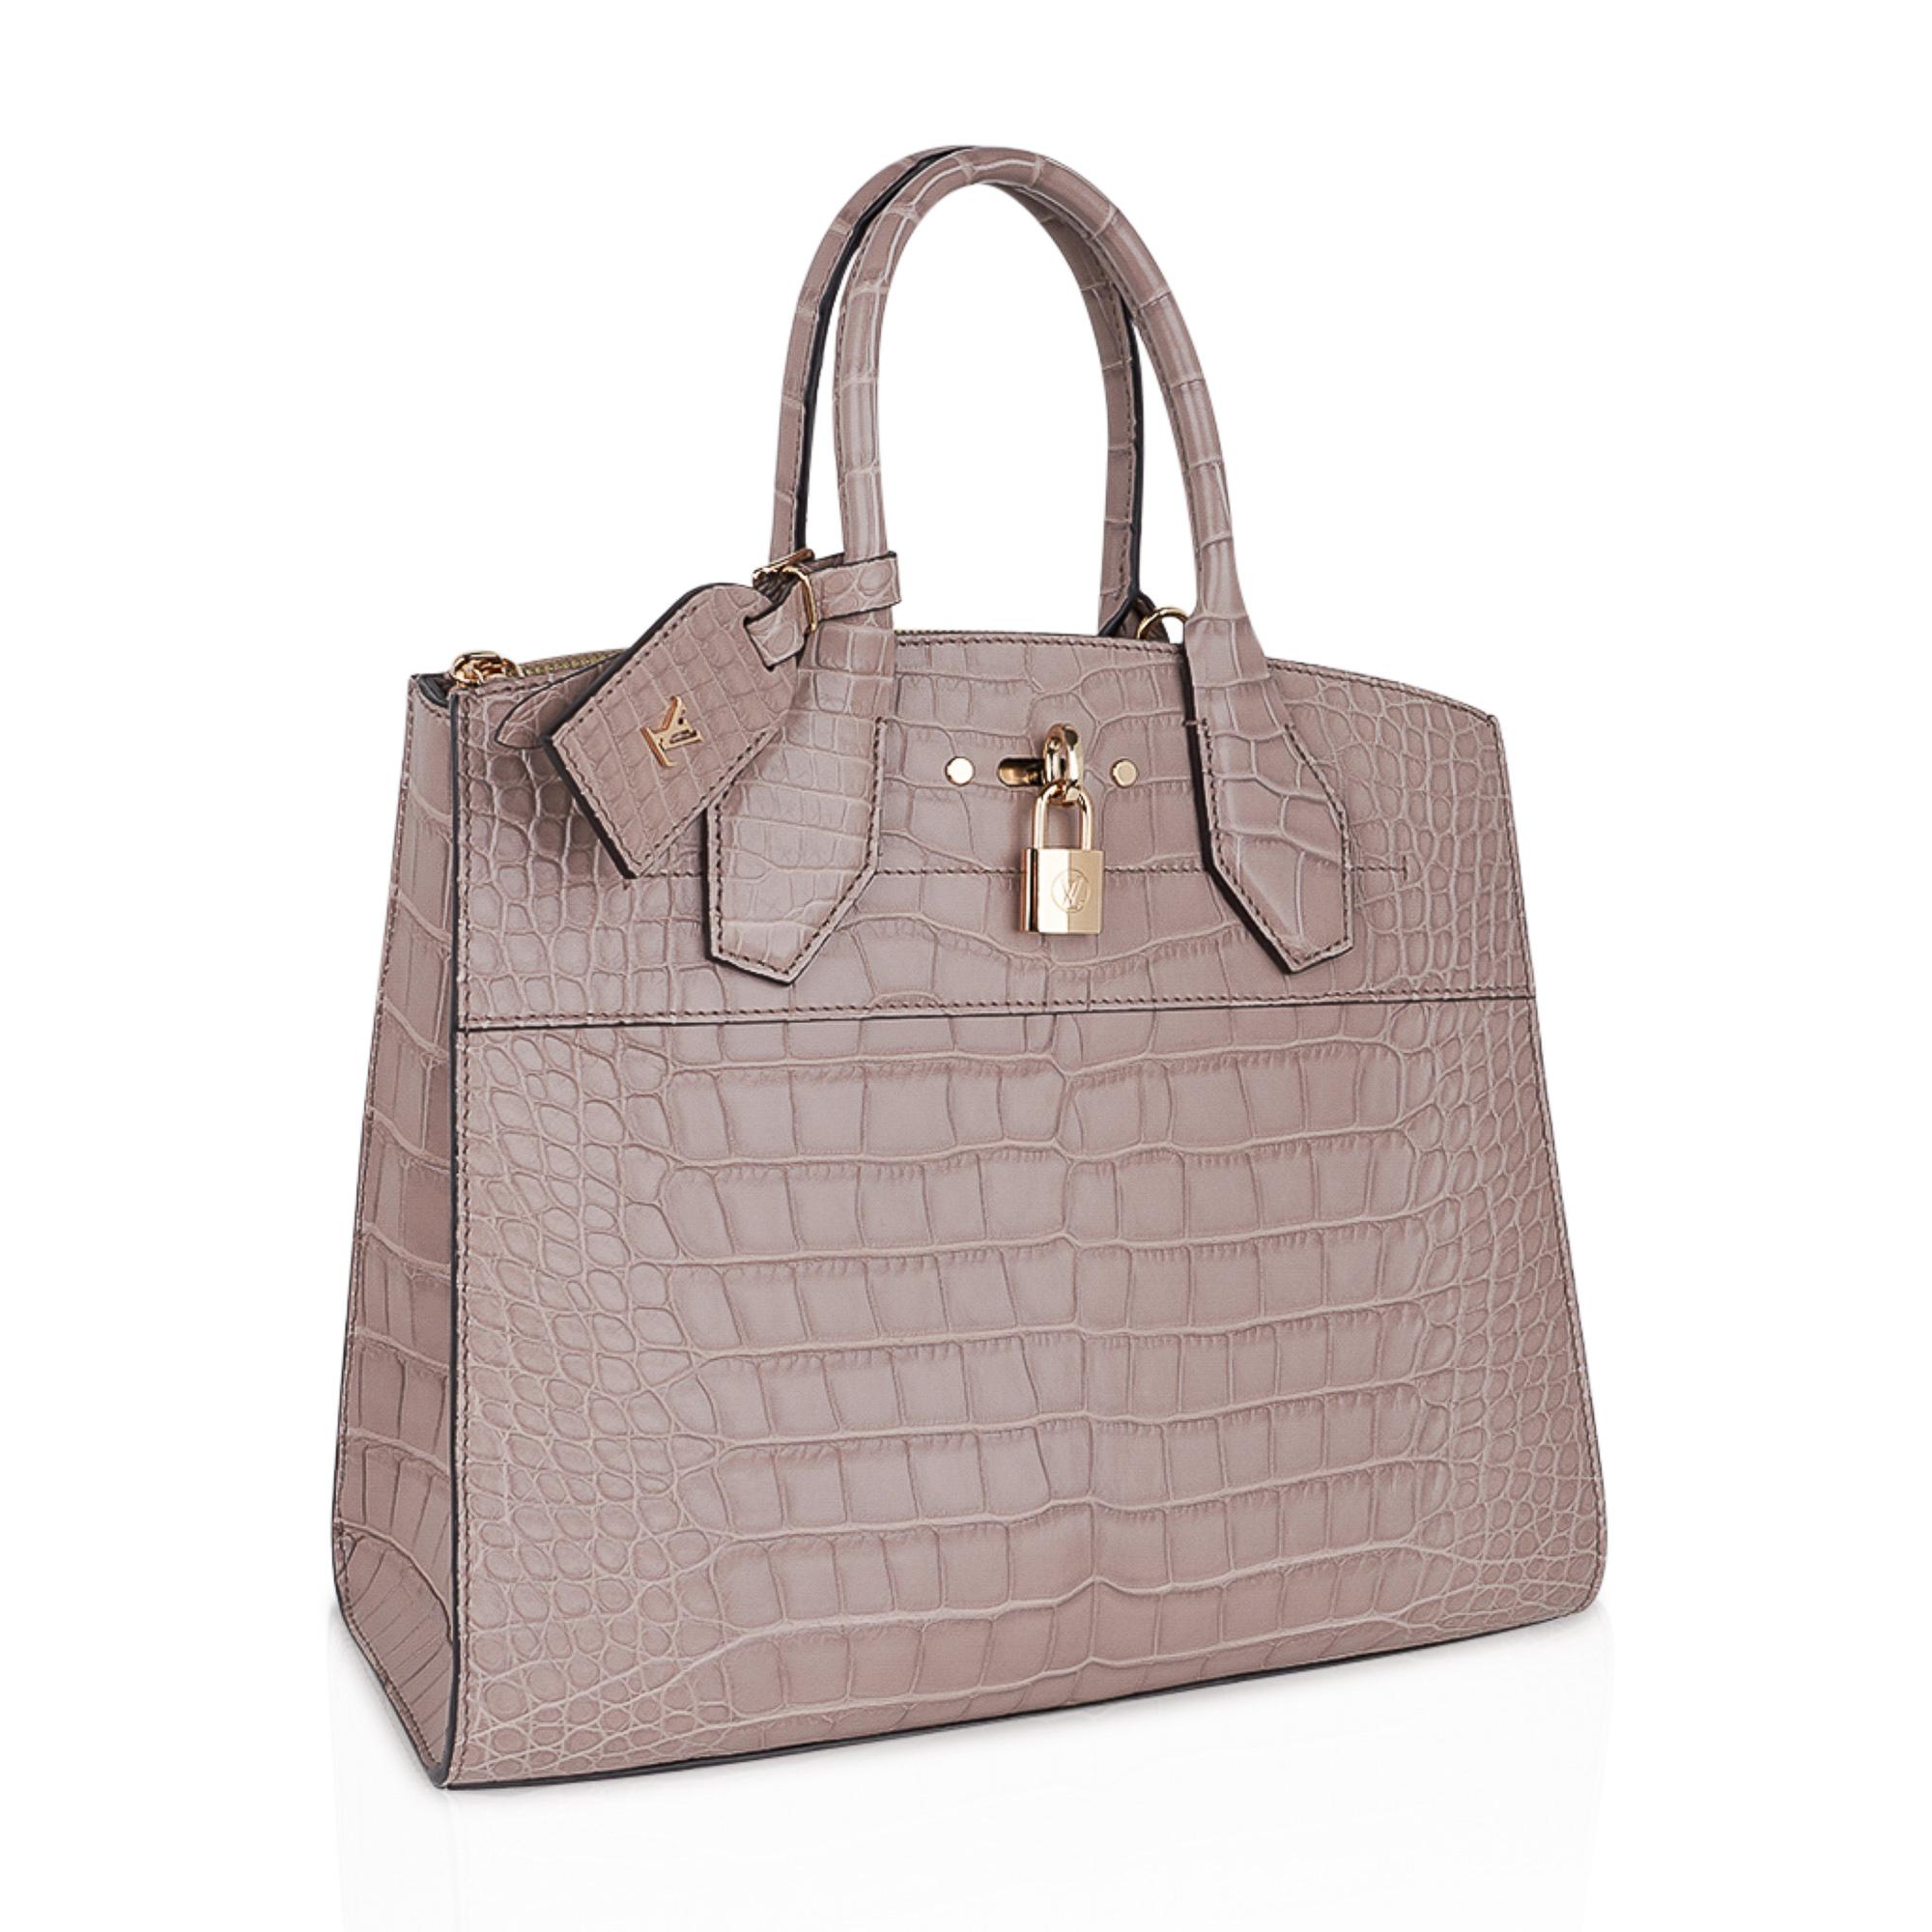 Mightychic offers a limited edition special order Louis Vuitton City Steamer MM featured in Taupe Matte exotic leather.
Inspired by Louis Vuitton luggage designed in 1901 for Cruise ship travel, Nicolas Ghesquiere created the City Steamer